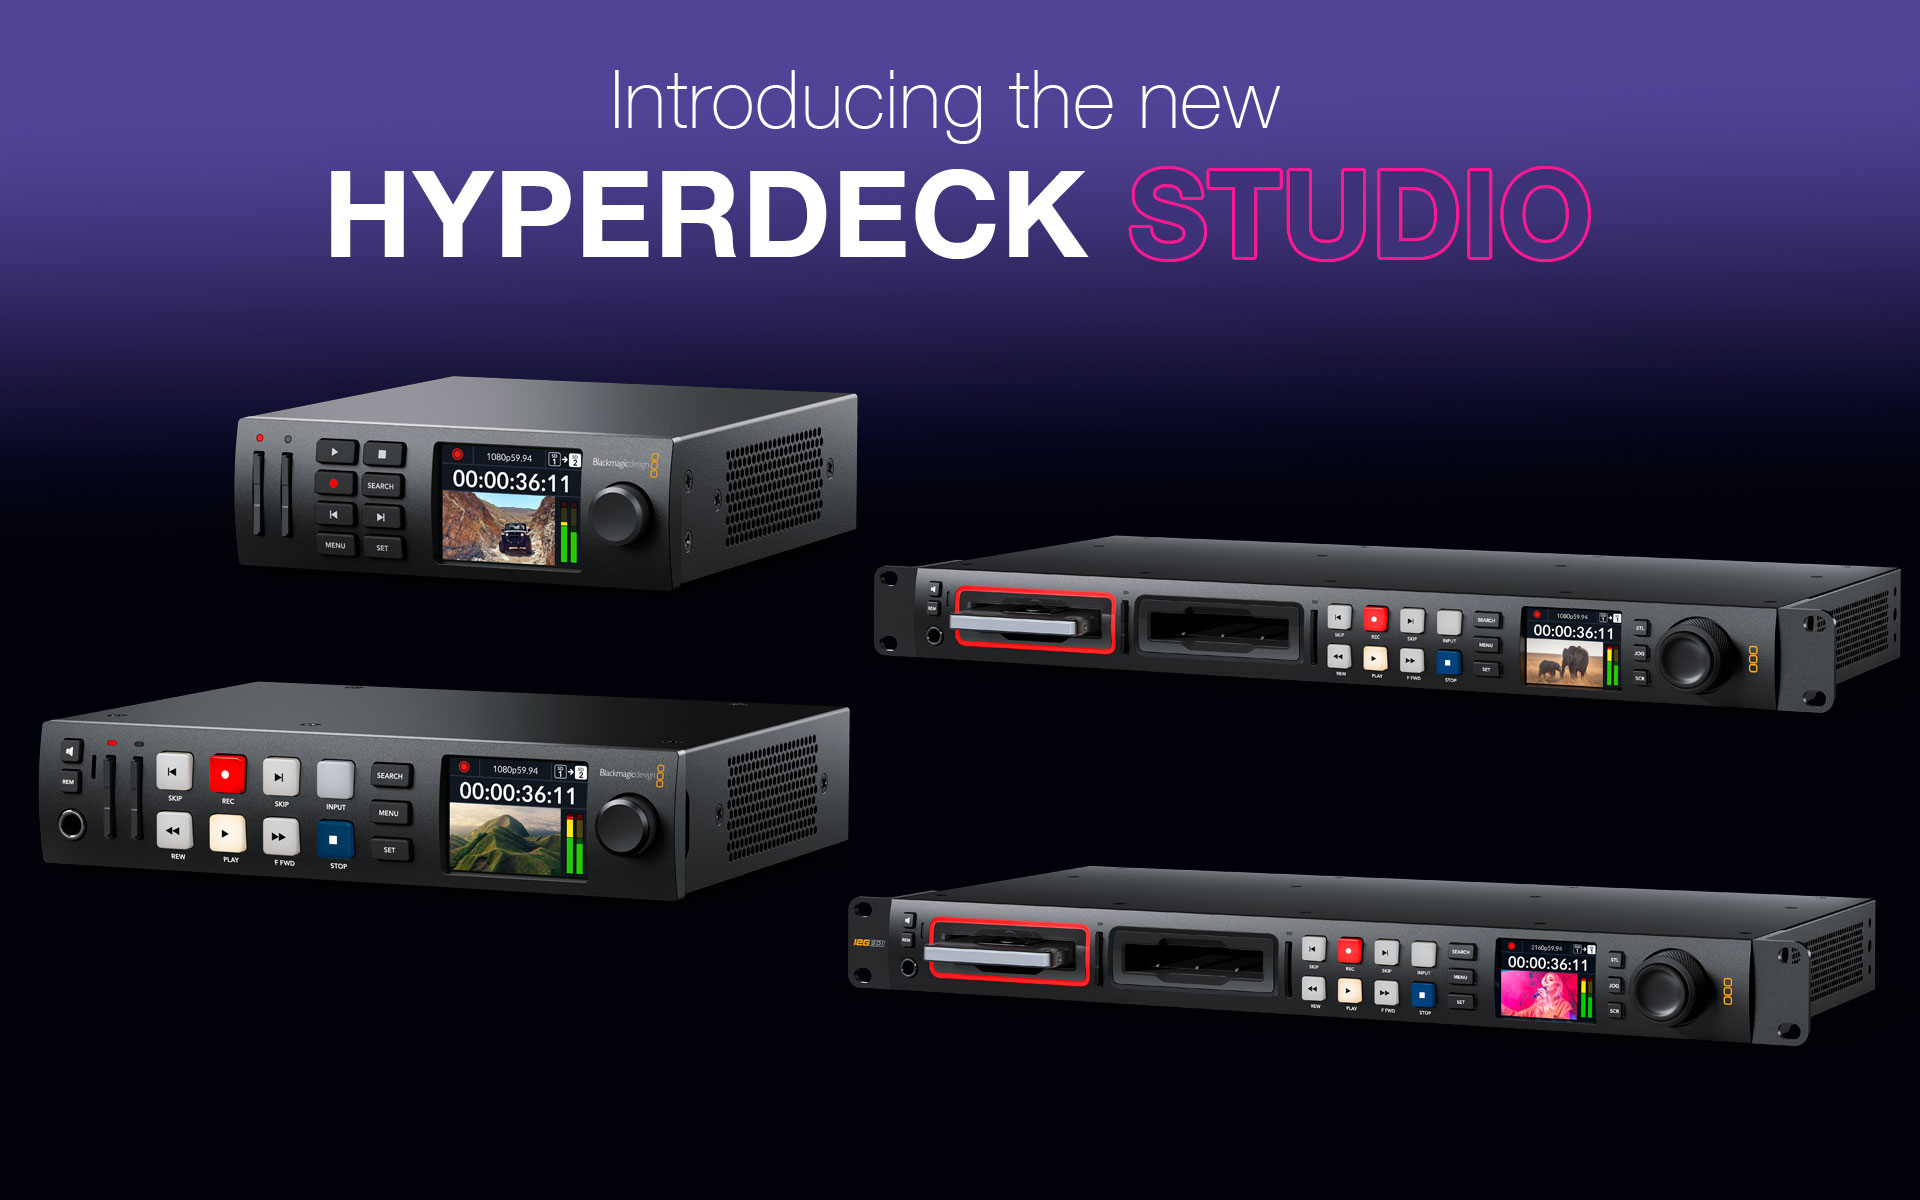 What's the Difference Between Blackmagic HyperDeck Studio Models